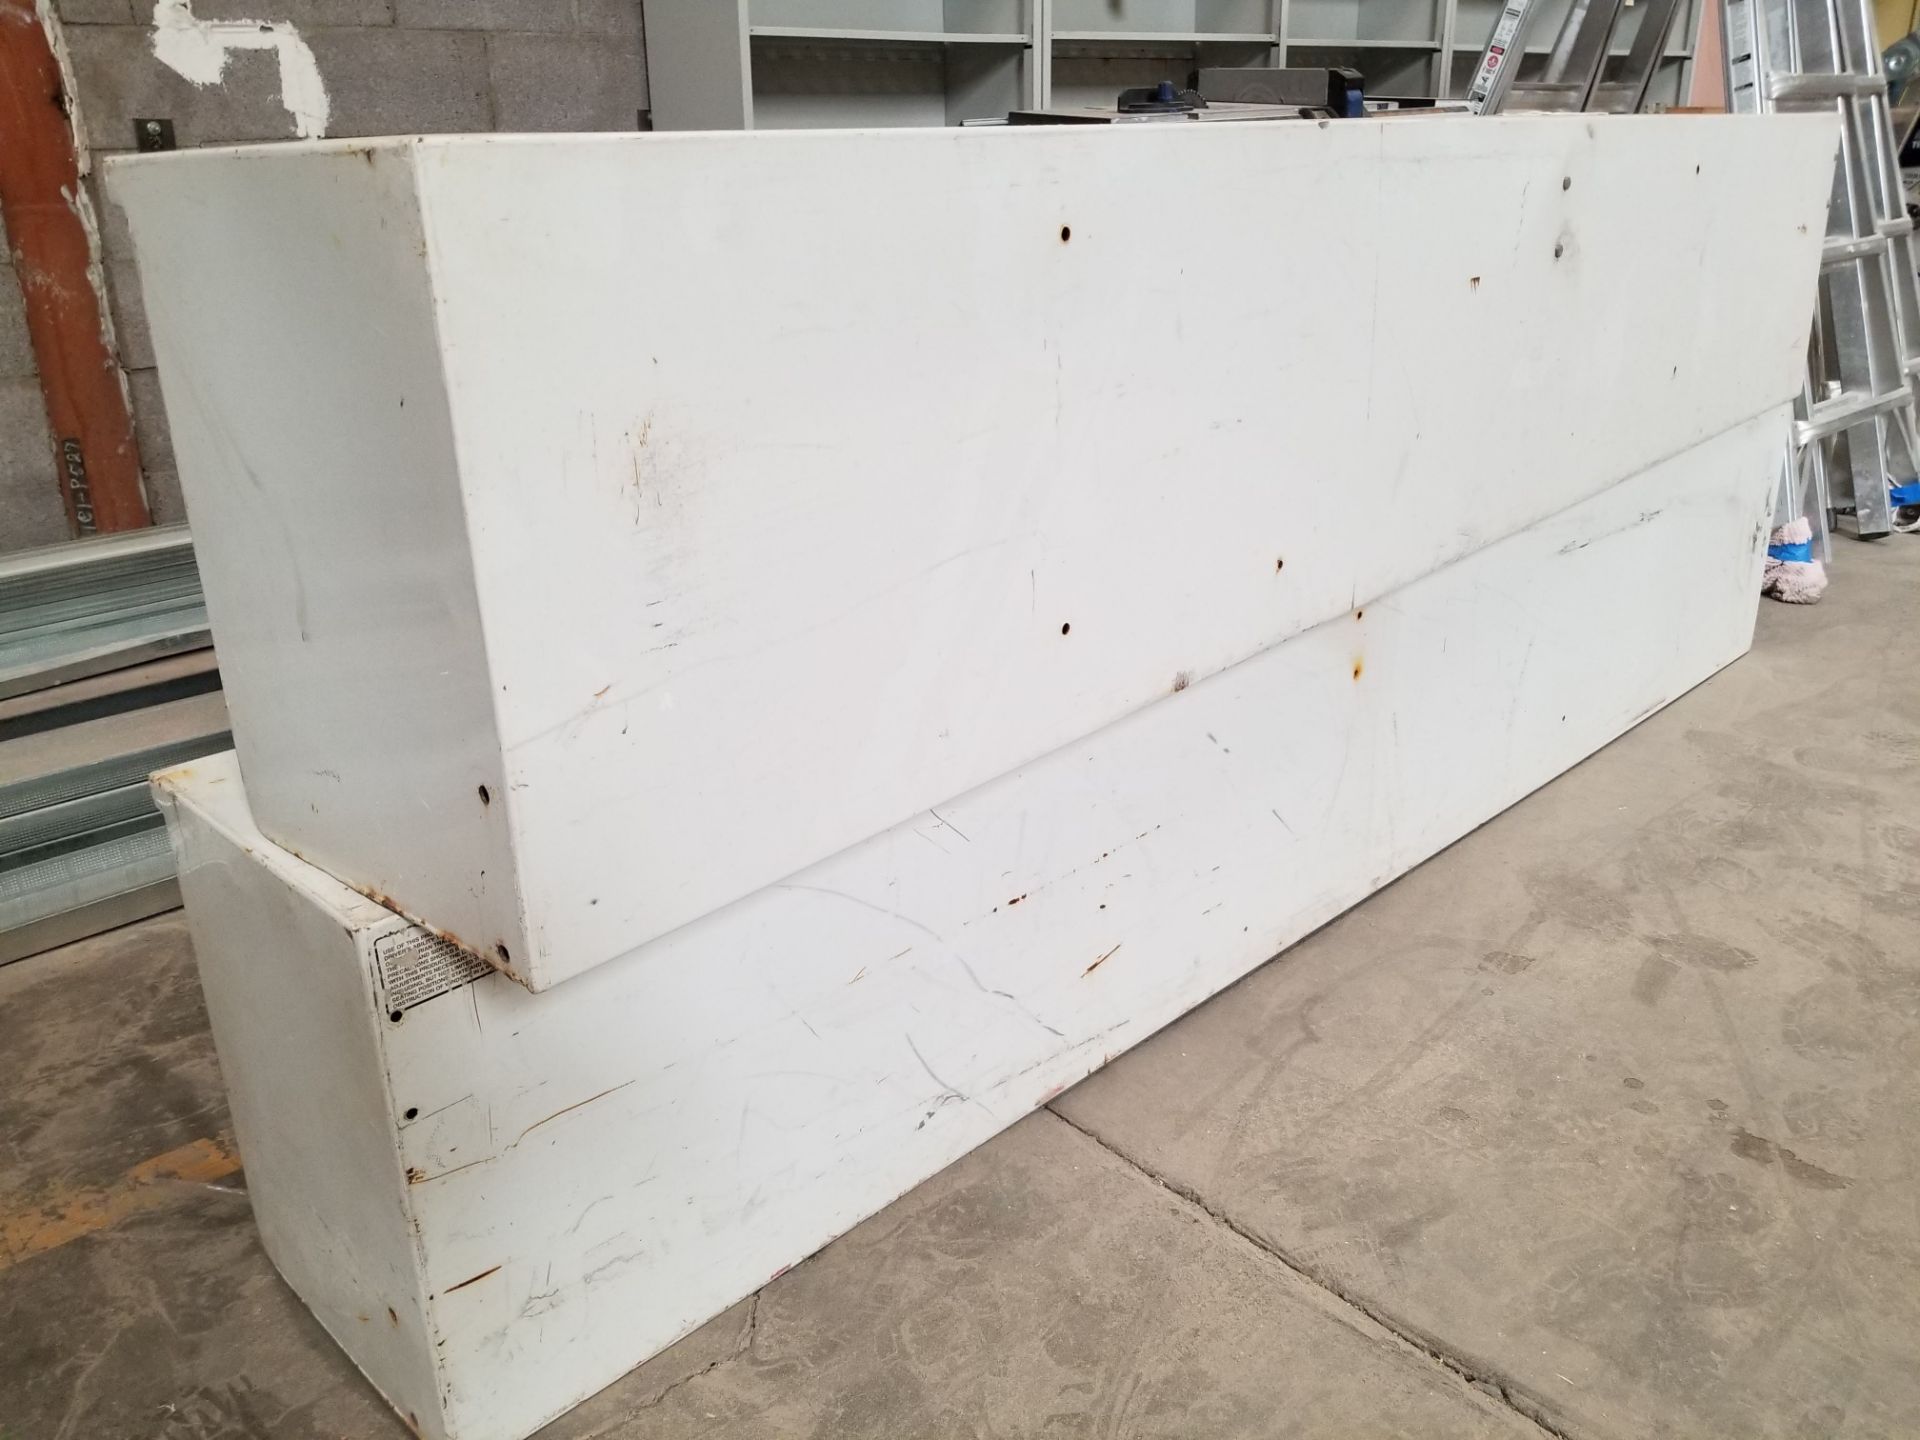 2 - Weather Guard R290 White Steel Hi-Side Truck Box 90"x13"x16" - Image 3 of 3